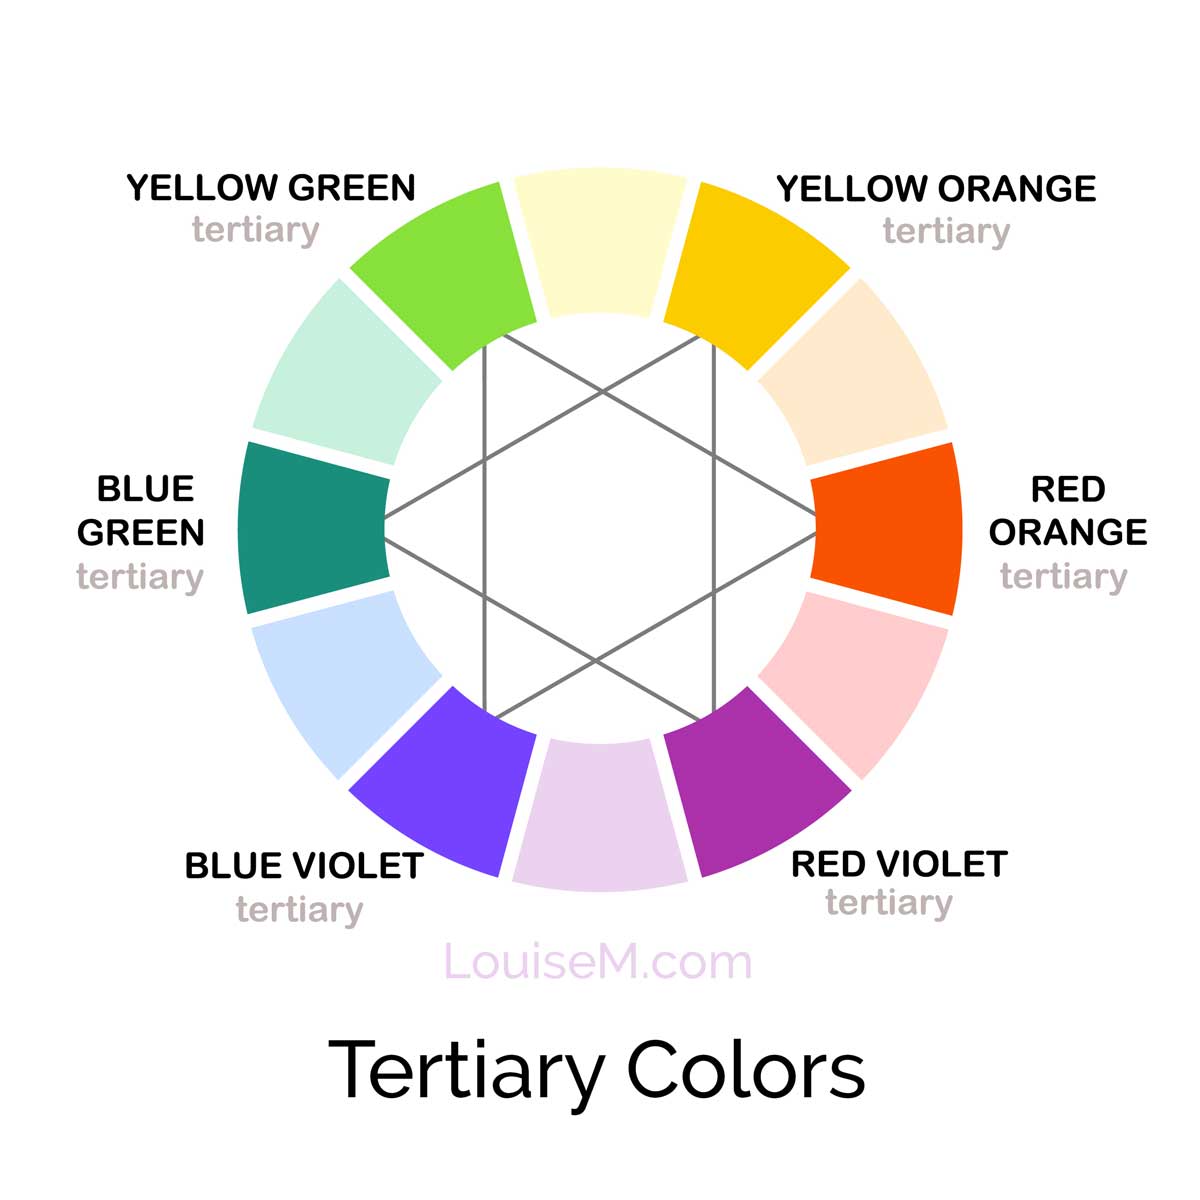 traditional RYB color wheel showing where the tertiary colors are found.